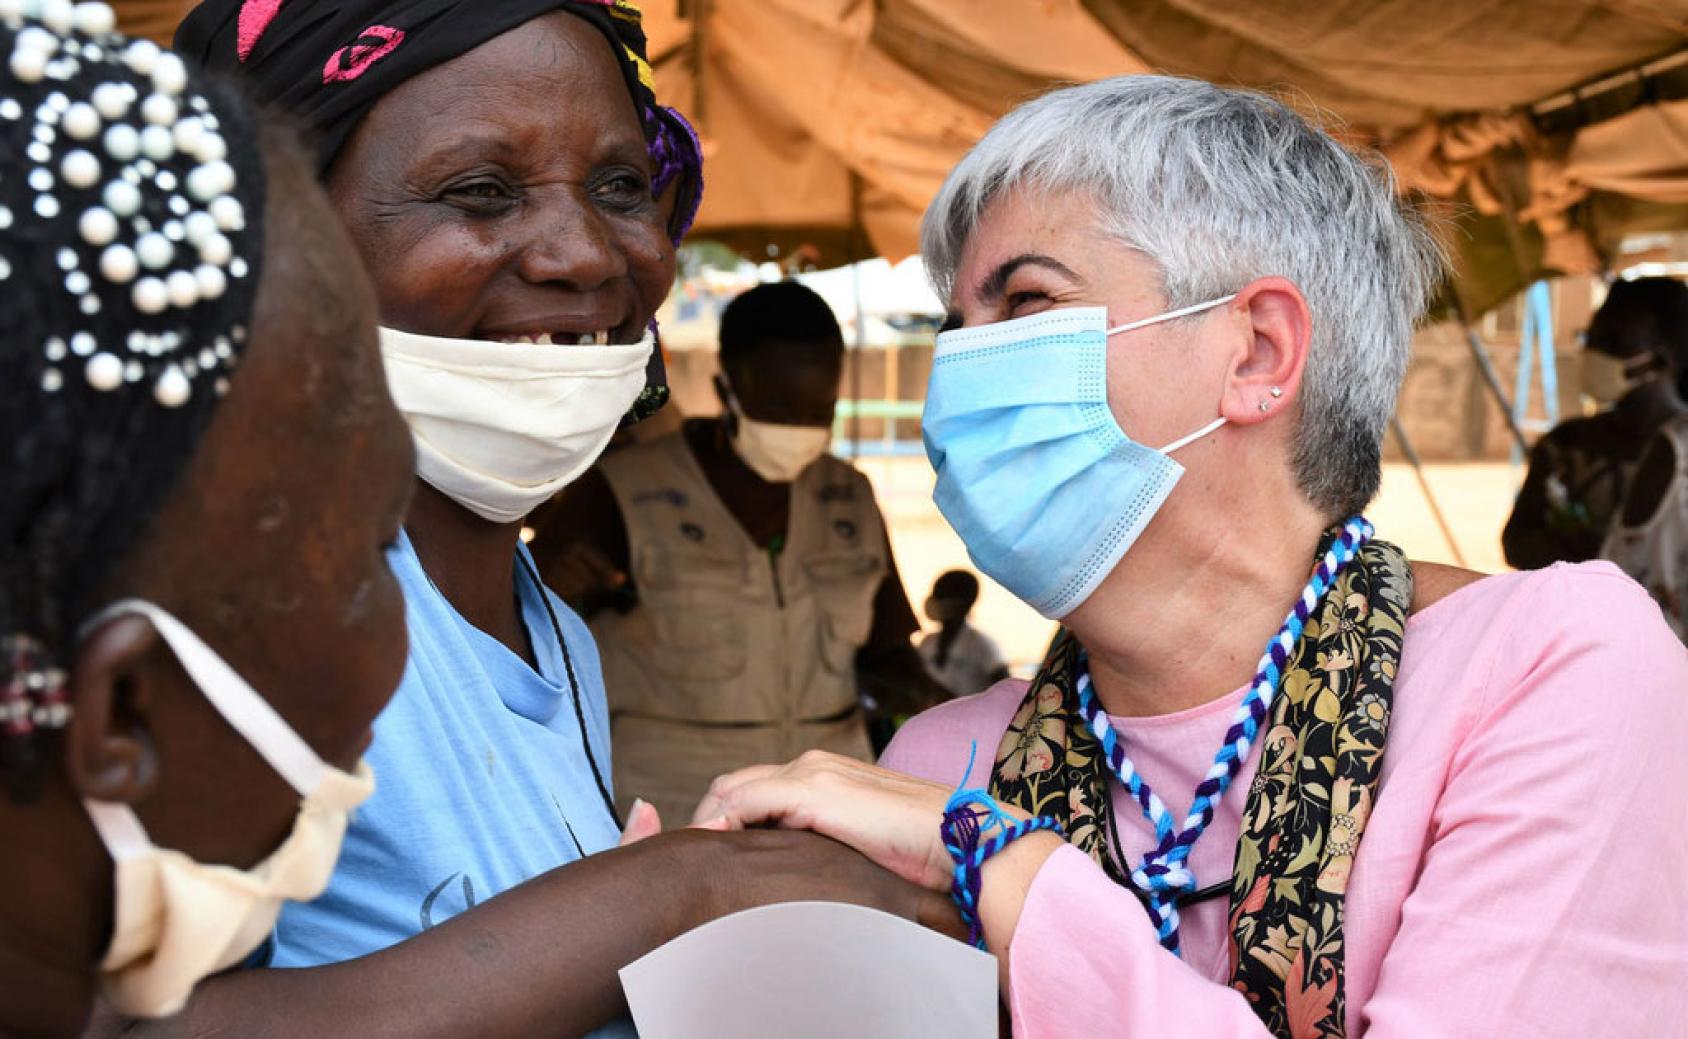 Resident and Humanitarian Coordinator in Burkina Faso Barbara Manzi (right) smiles and holds the hand of a smiling woman, wearing a mask, while another one faces them on the left. 